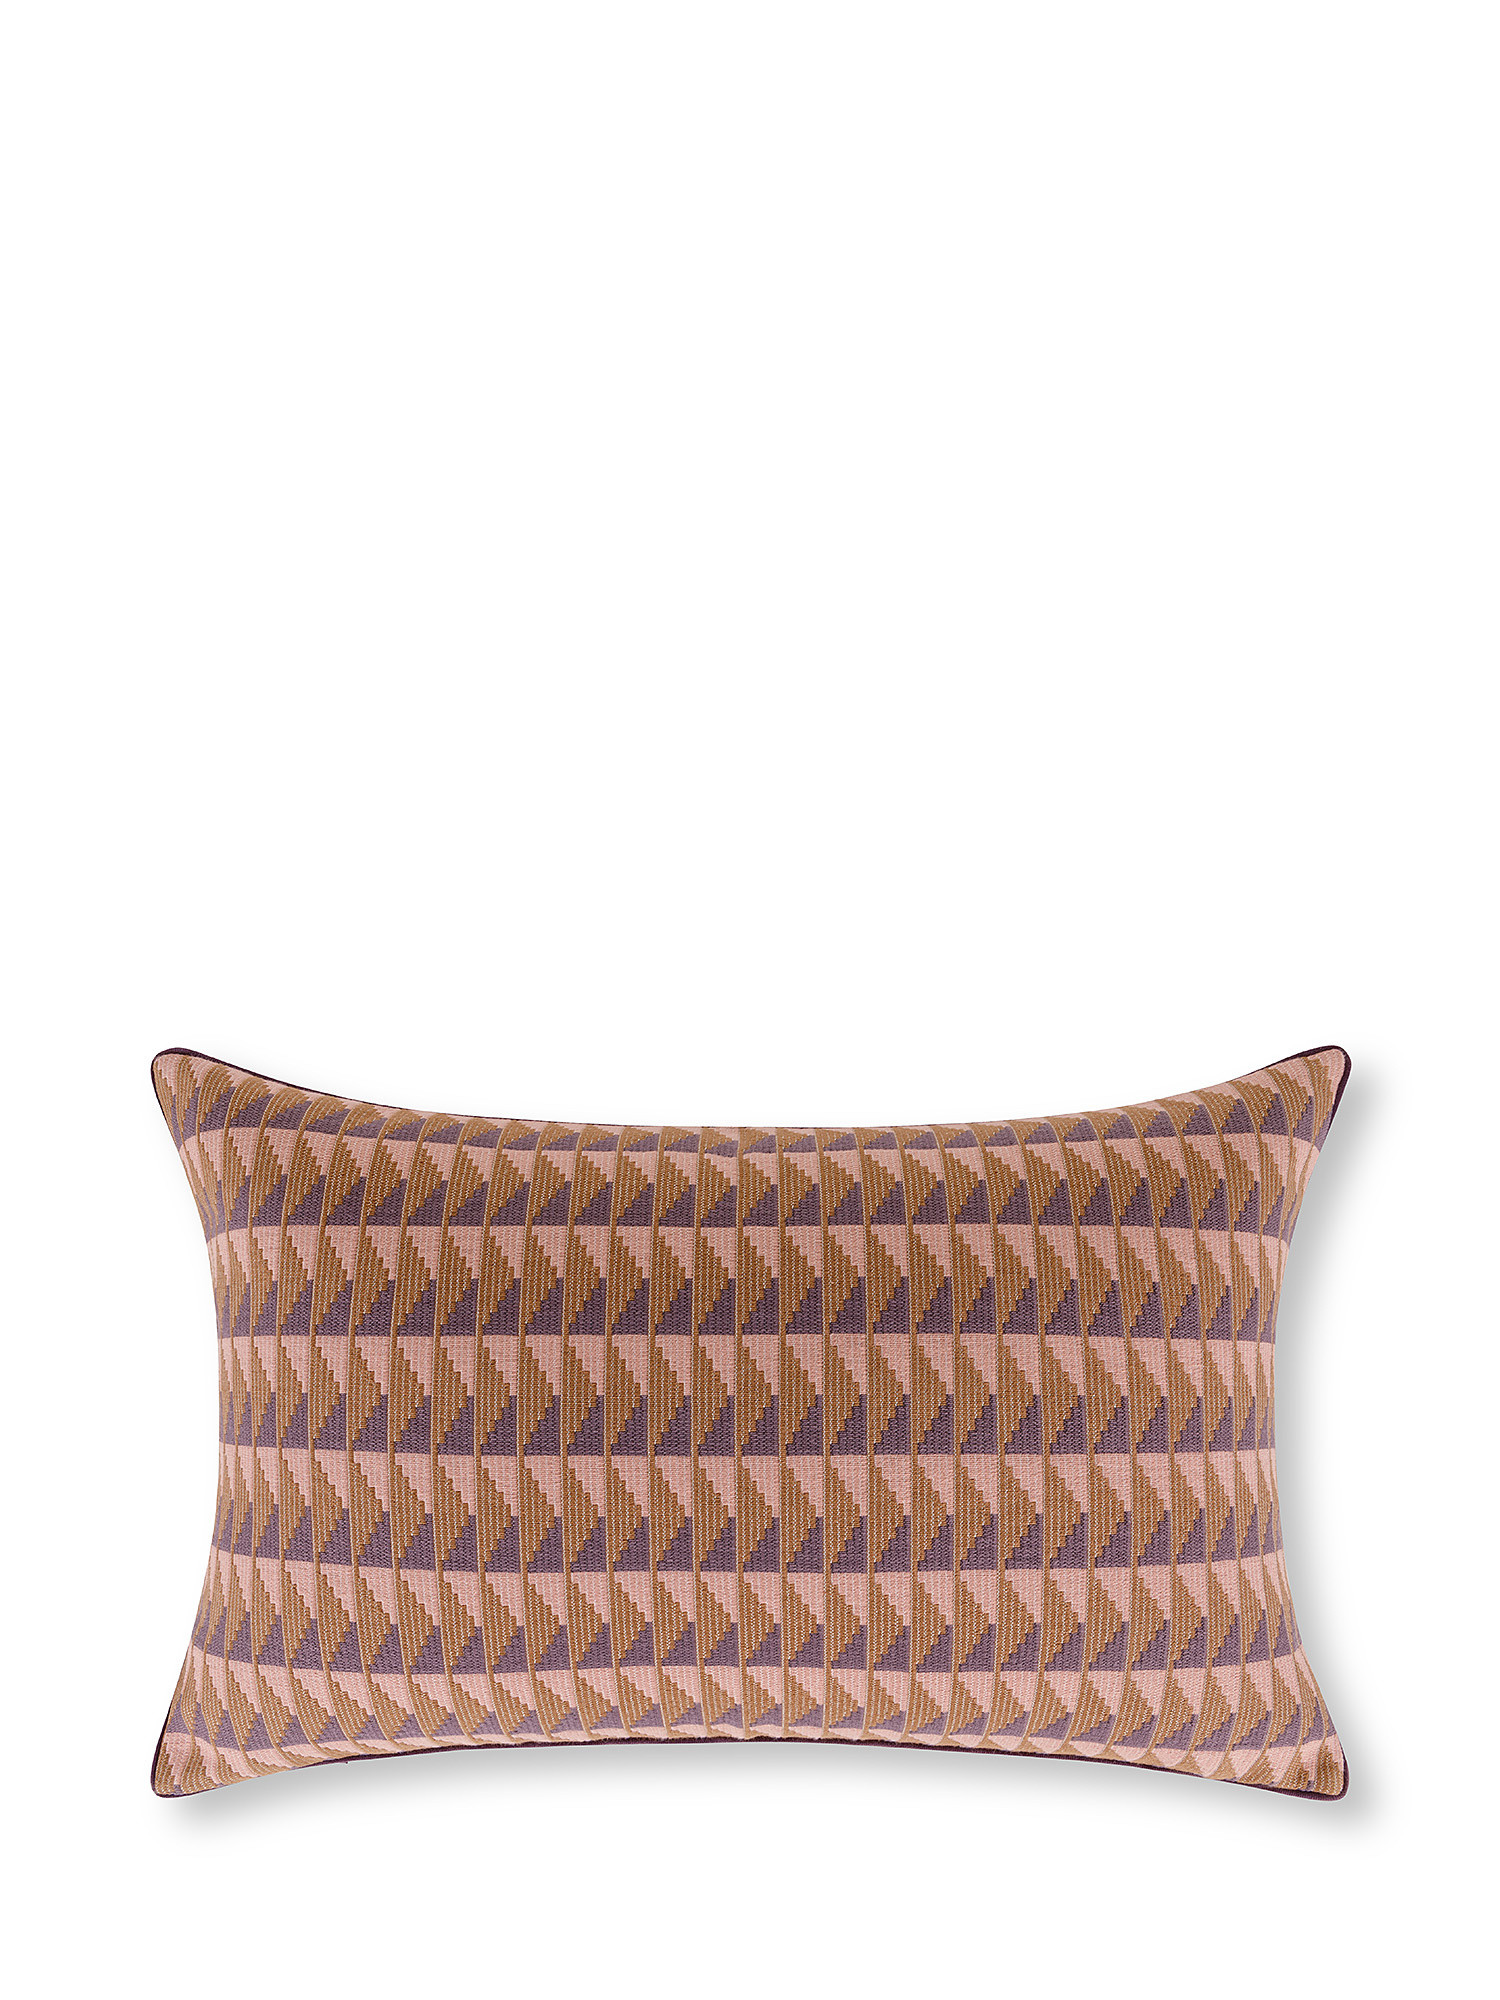 Jacquard cushion with zig zag motif 35x55cm, Brown, large image number 0